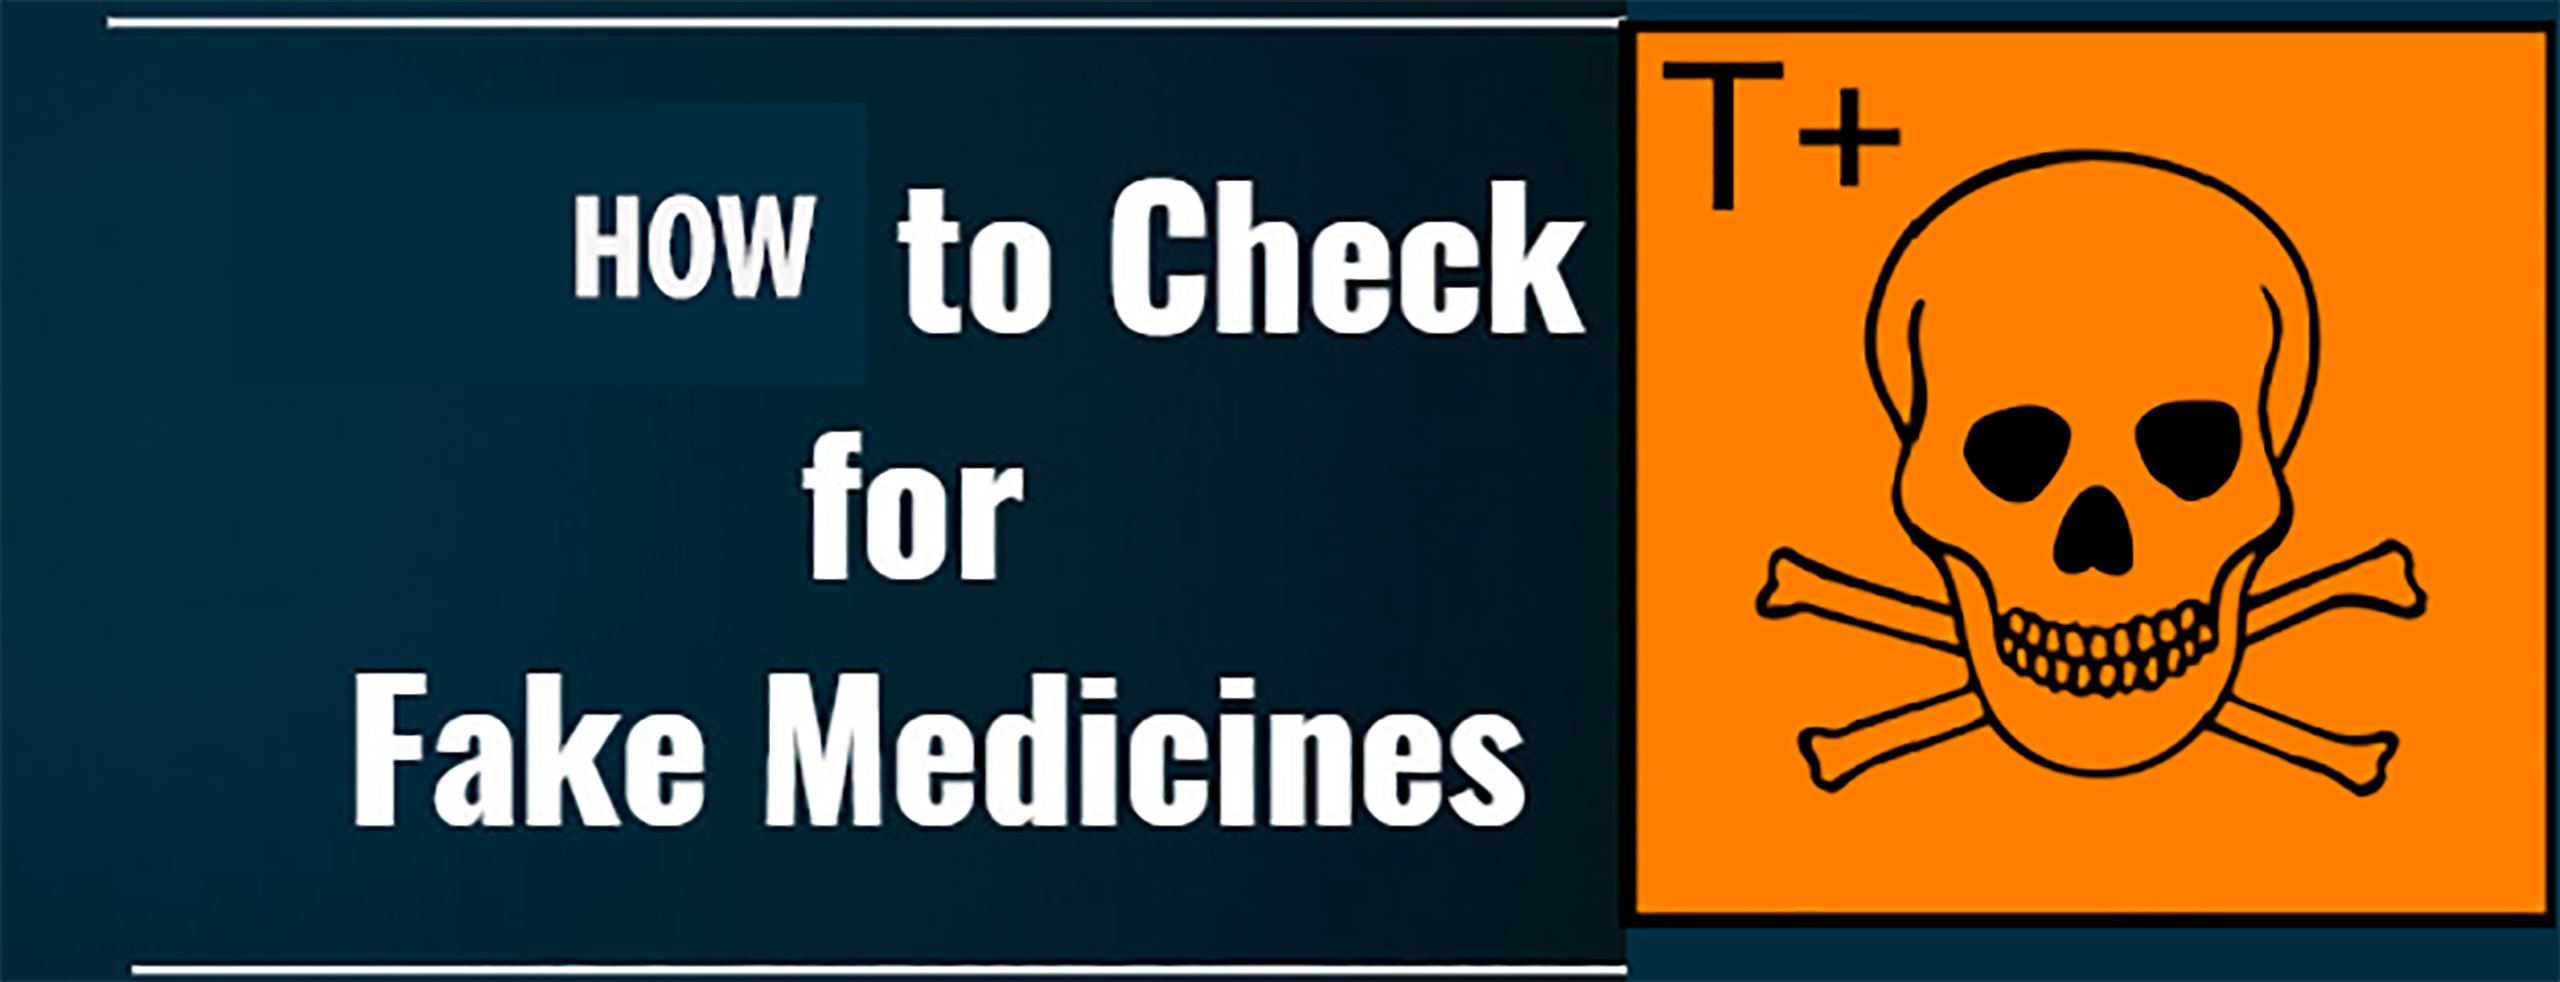 how to check for fake medicines